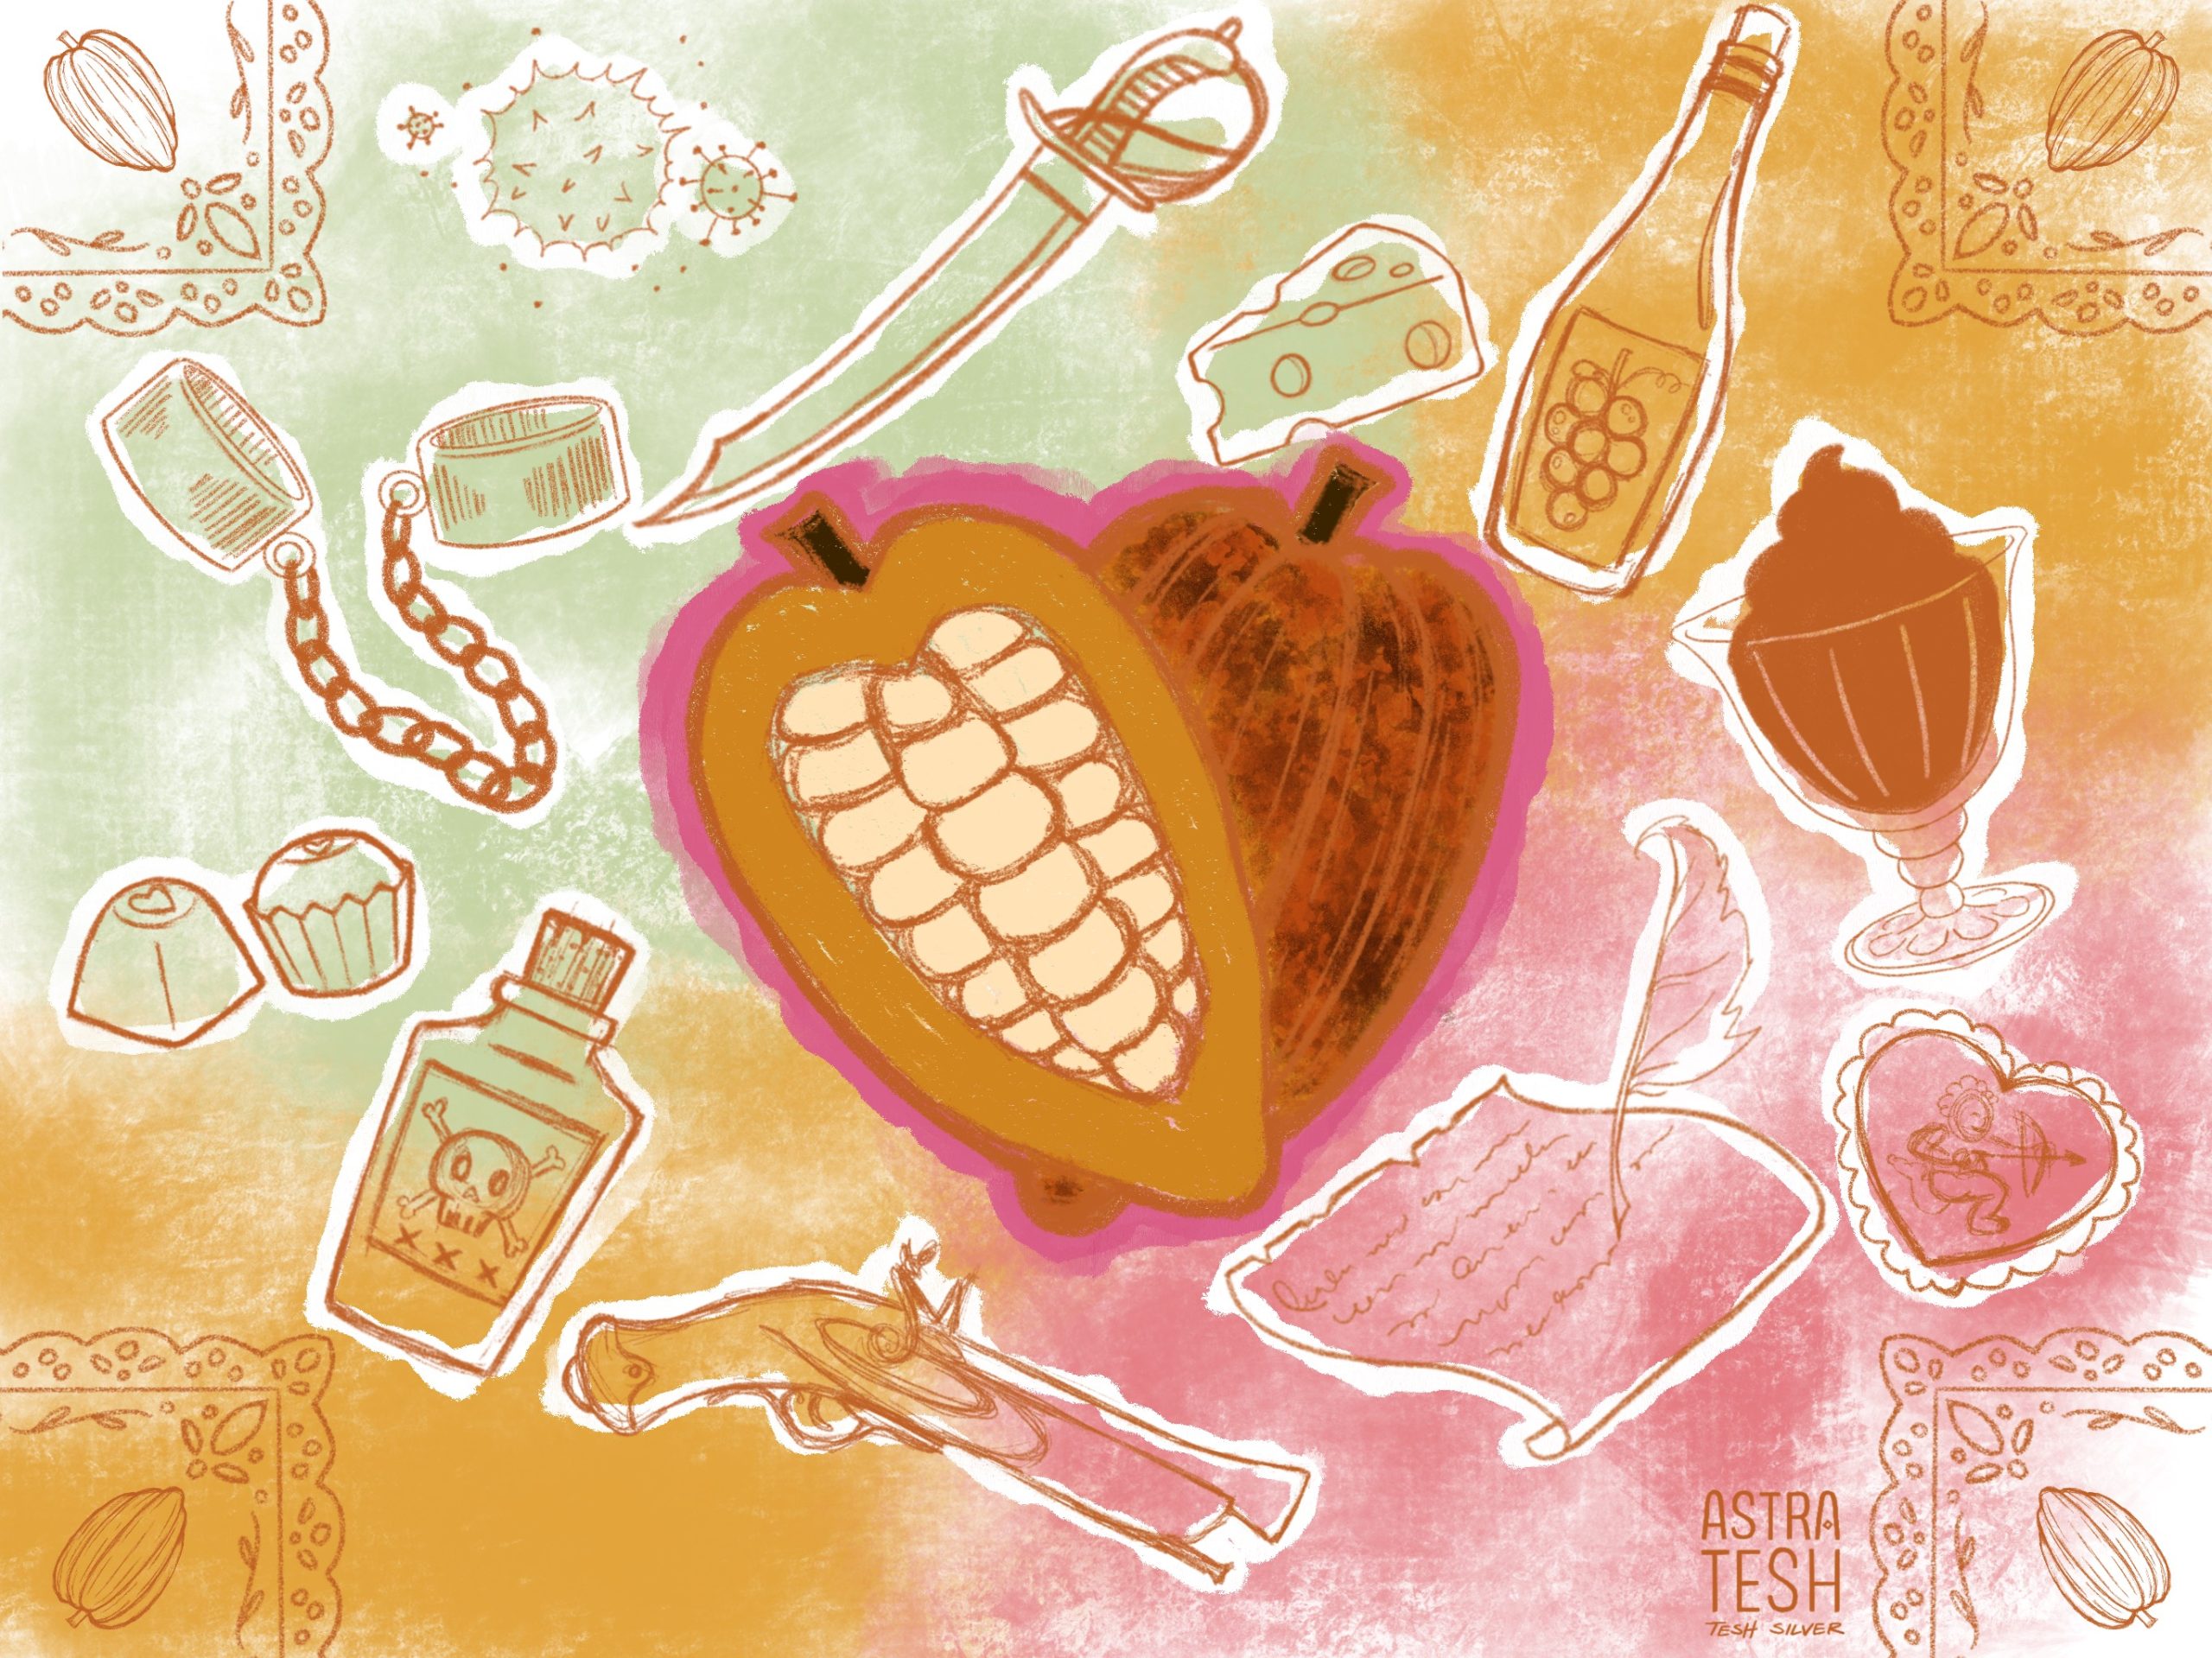 Image: An illustration of light pastel colors; the top left, a mint green; the bottom right, a pink; the top right and bottom left, turmeric and ochres. In each quadrant are images of food and violence, such as corn, cheese, guns, swords, liquor, and handcuffs. In the center is a halved cacao fruit, with one half facing away from us and one facing towards us, arranged like a heart. In each corner is a stamp with a cacao fruit on it. Illustration by Teshika Silver.